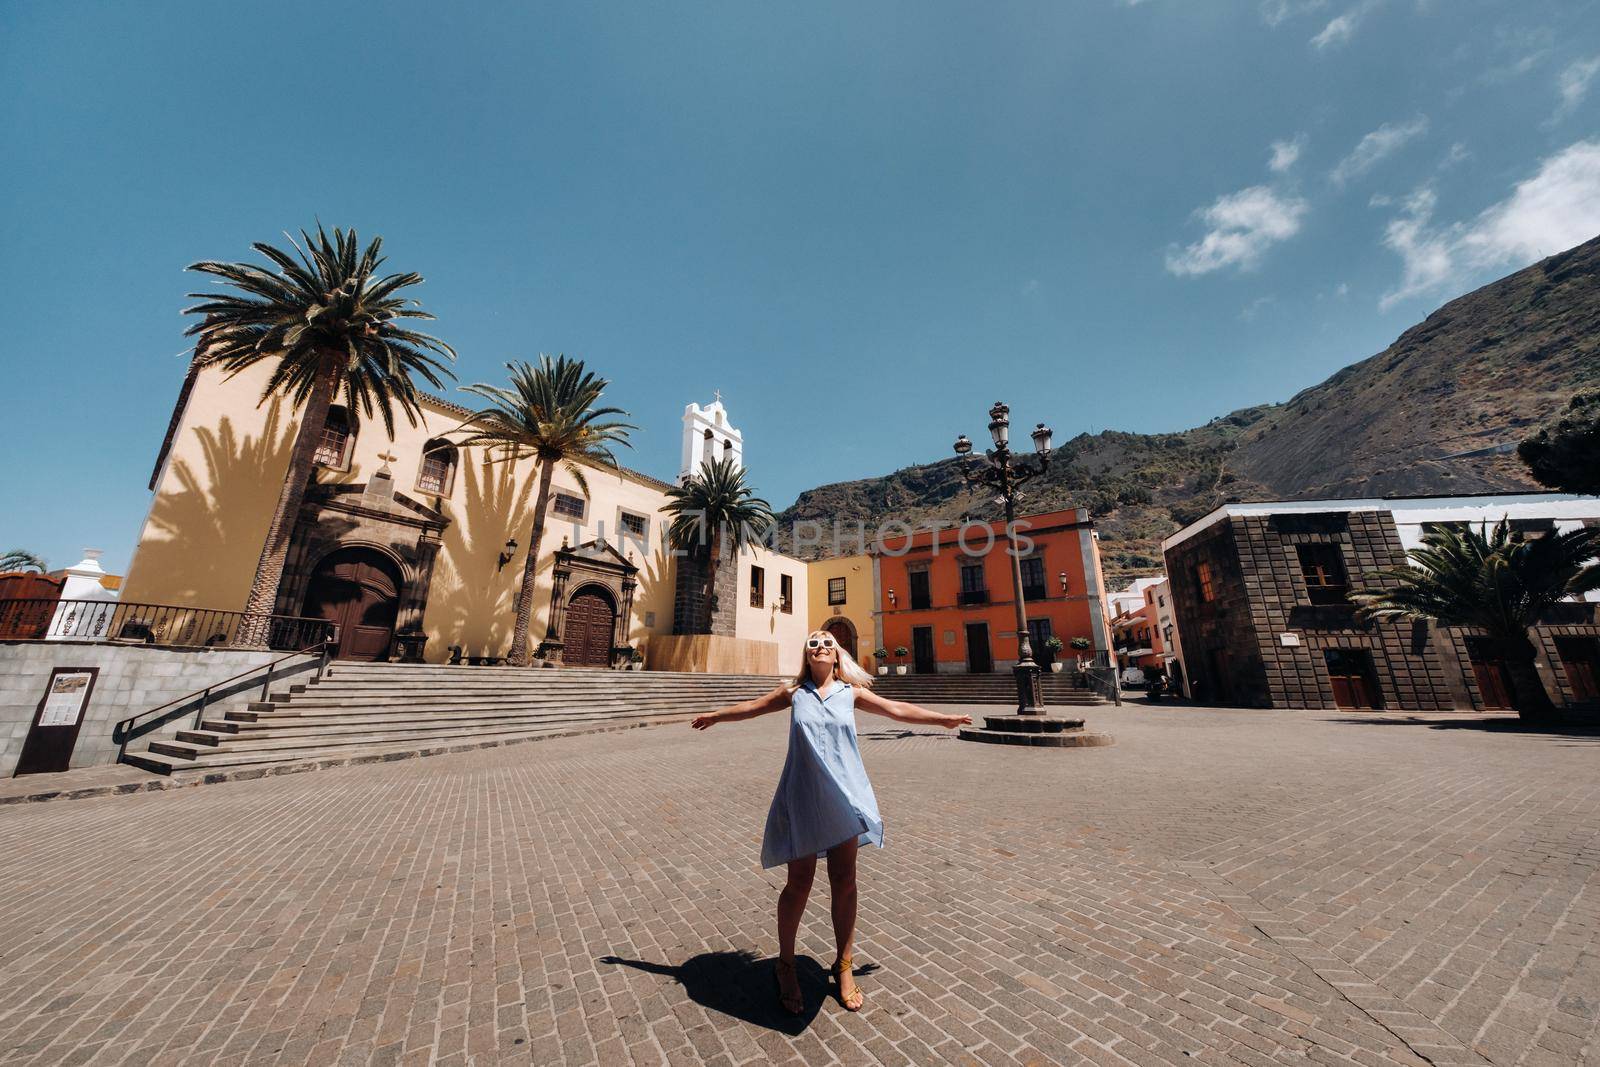 A girl in a blue dress walks through the Old town of Garachico on the island of Tenerife on a Sunny day.A tourist walks through the old town of Tenerife in the Canary Islands.Spain